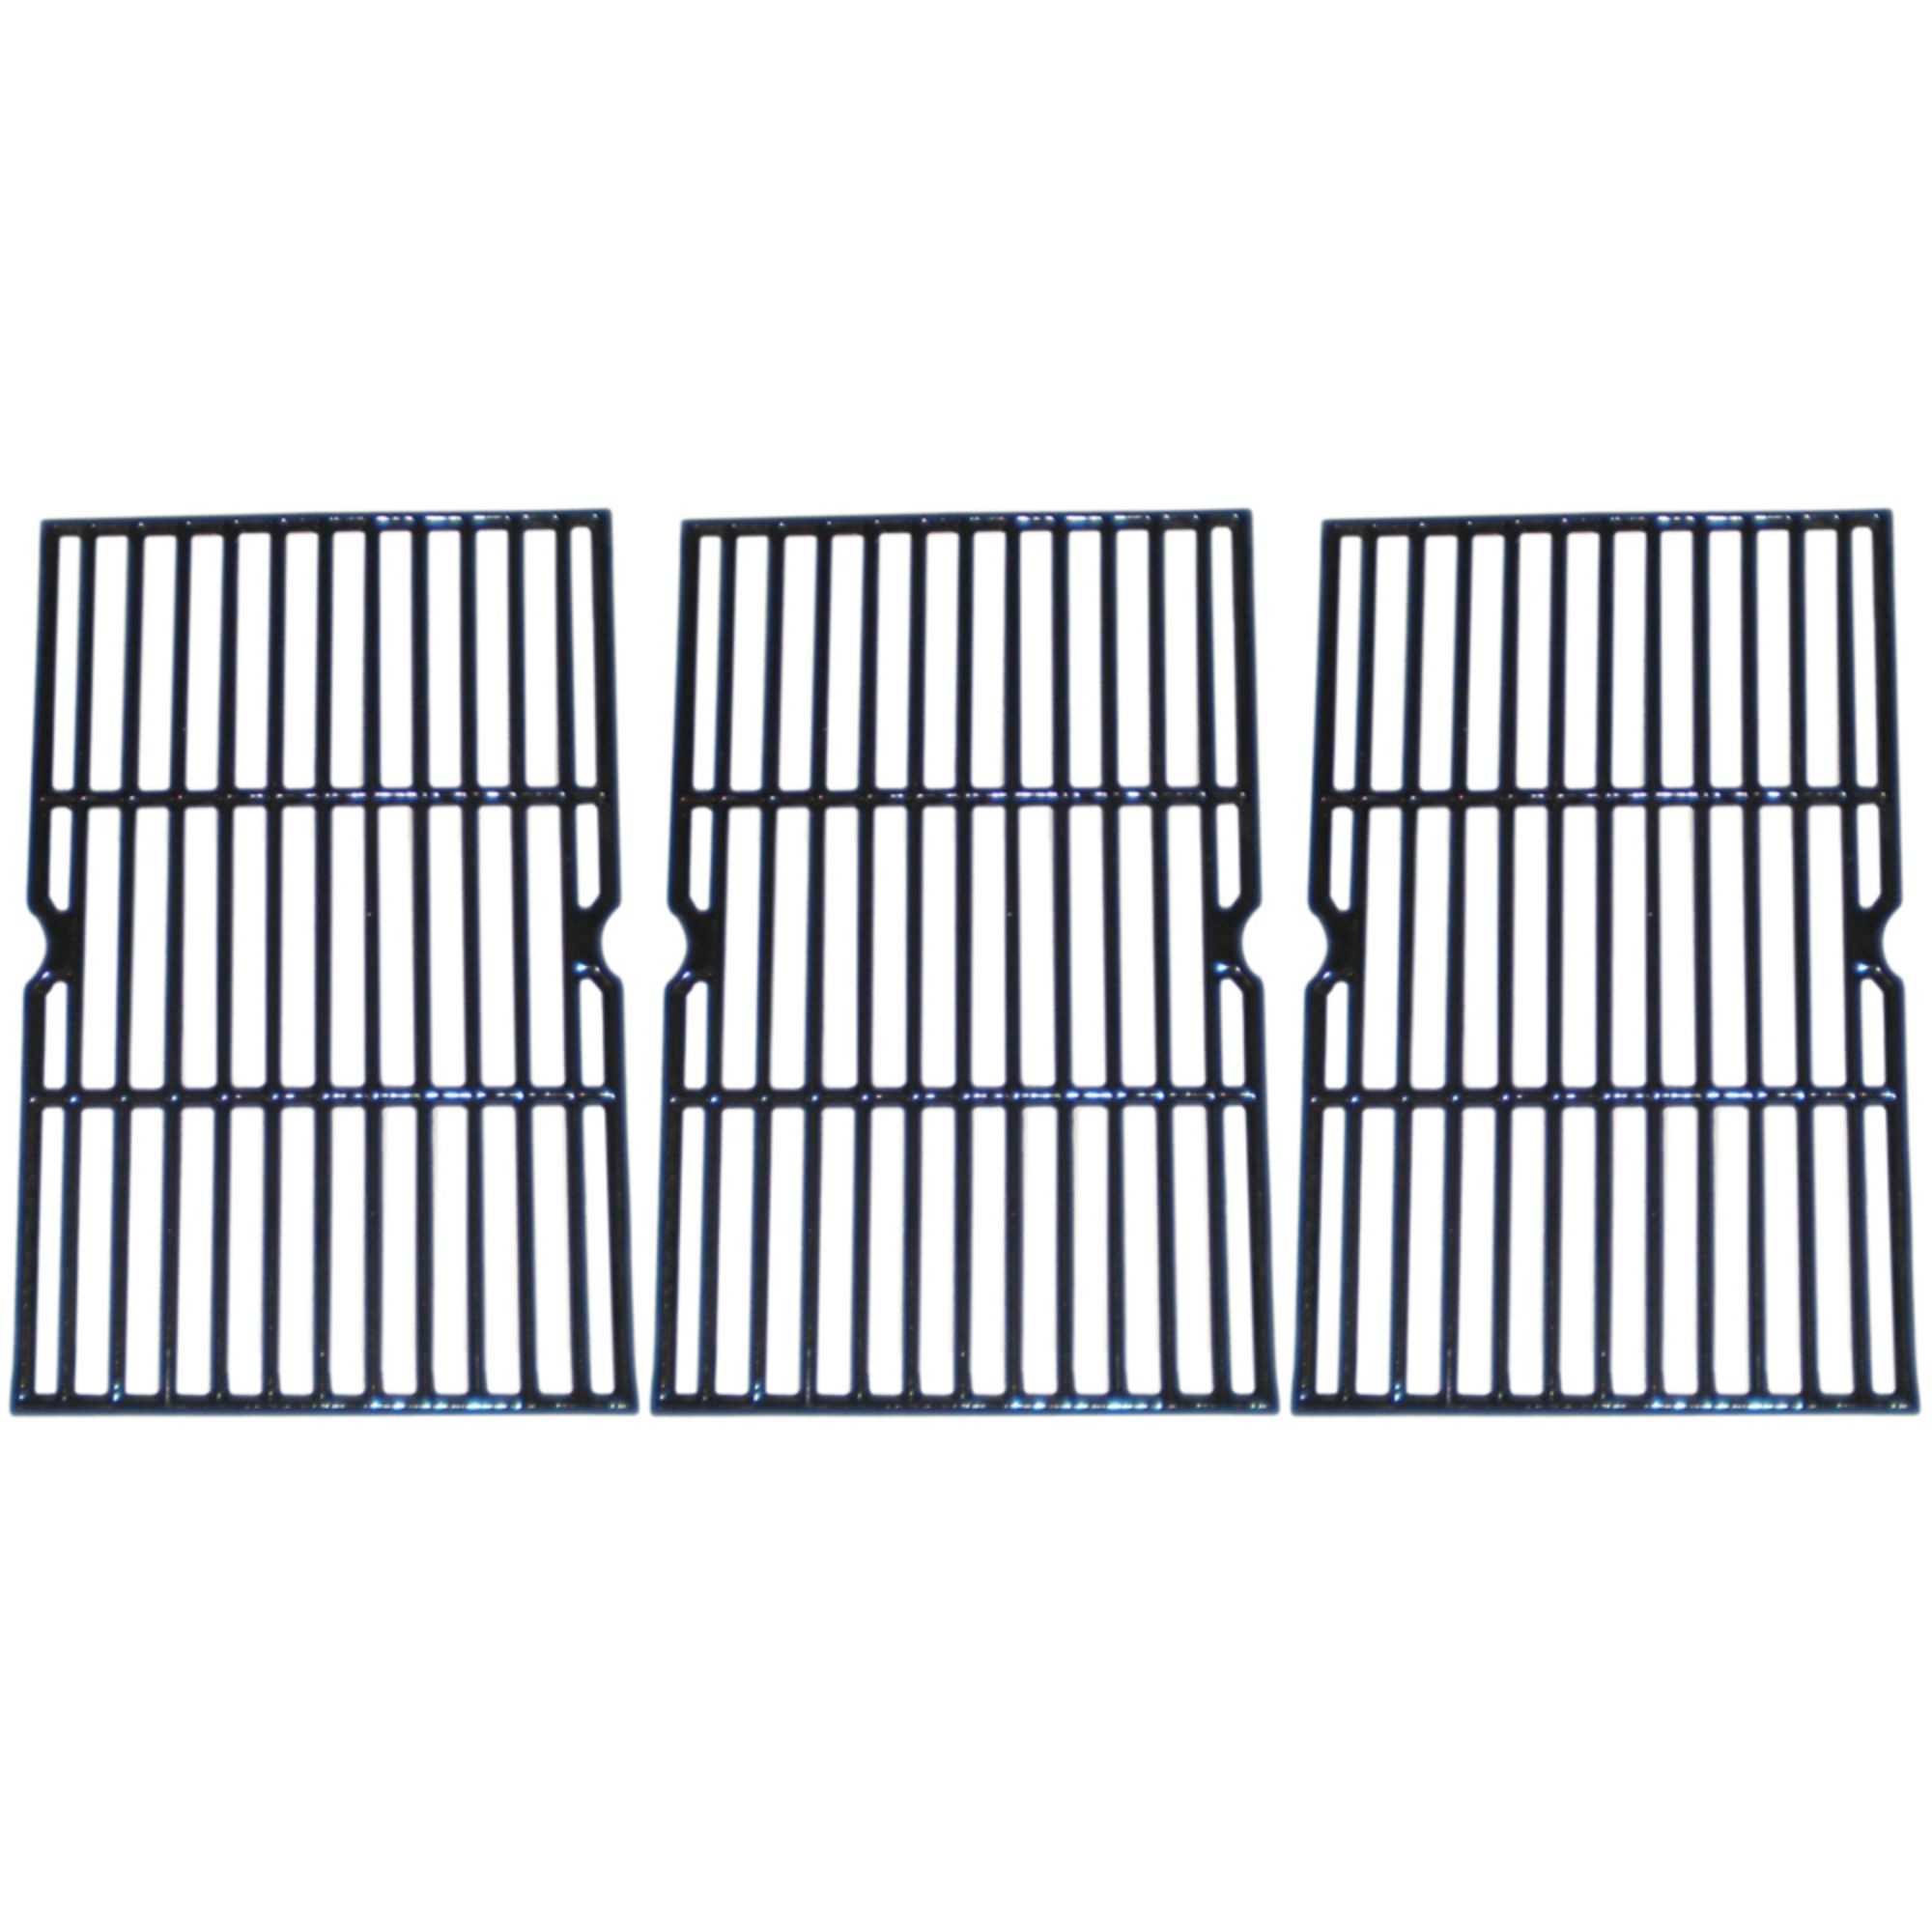 Gloss cast iron cooking grid for Uniflame brand gas grills